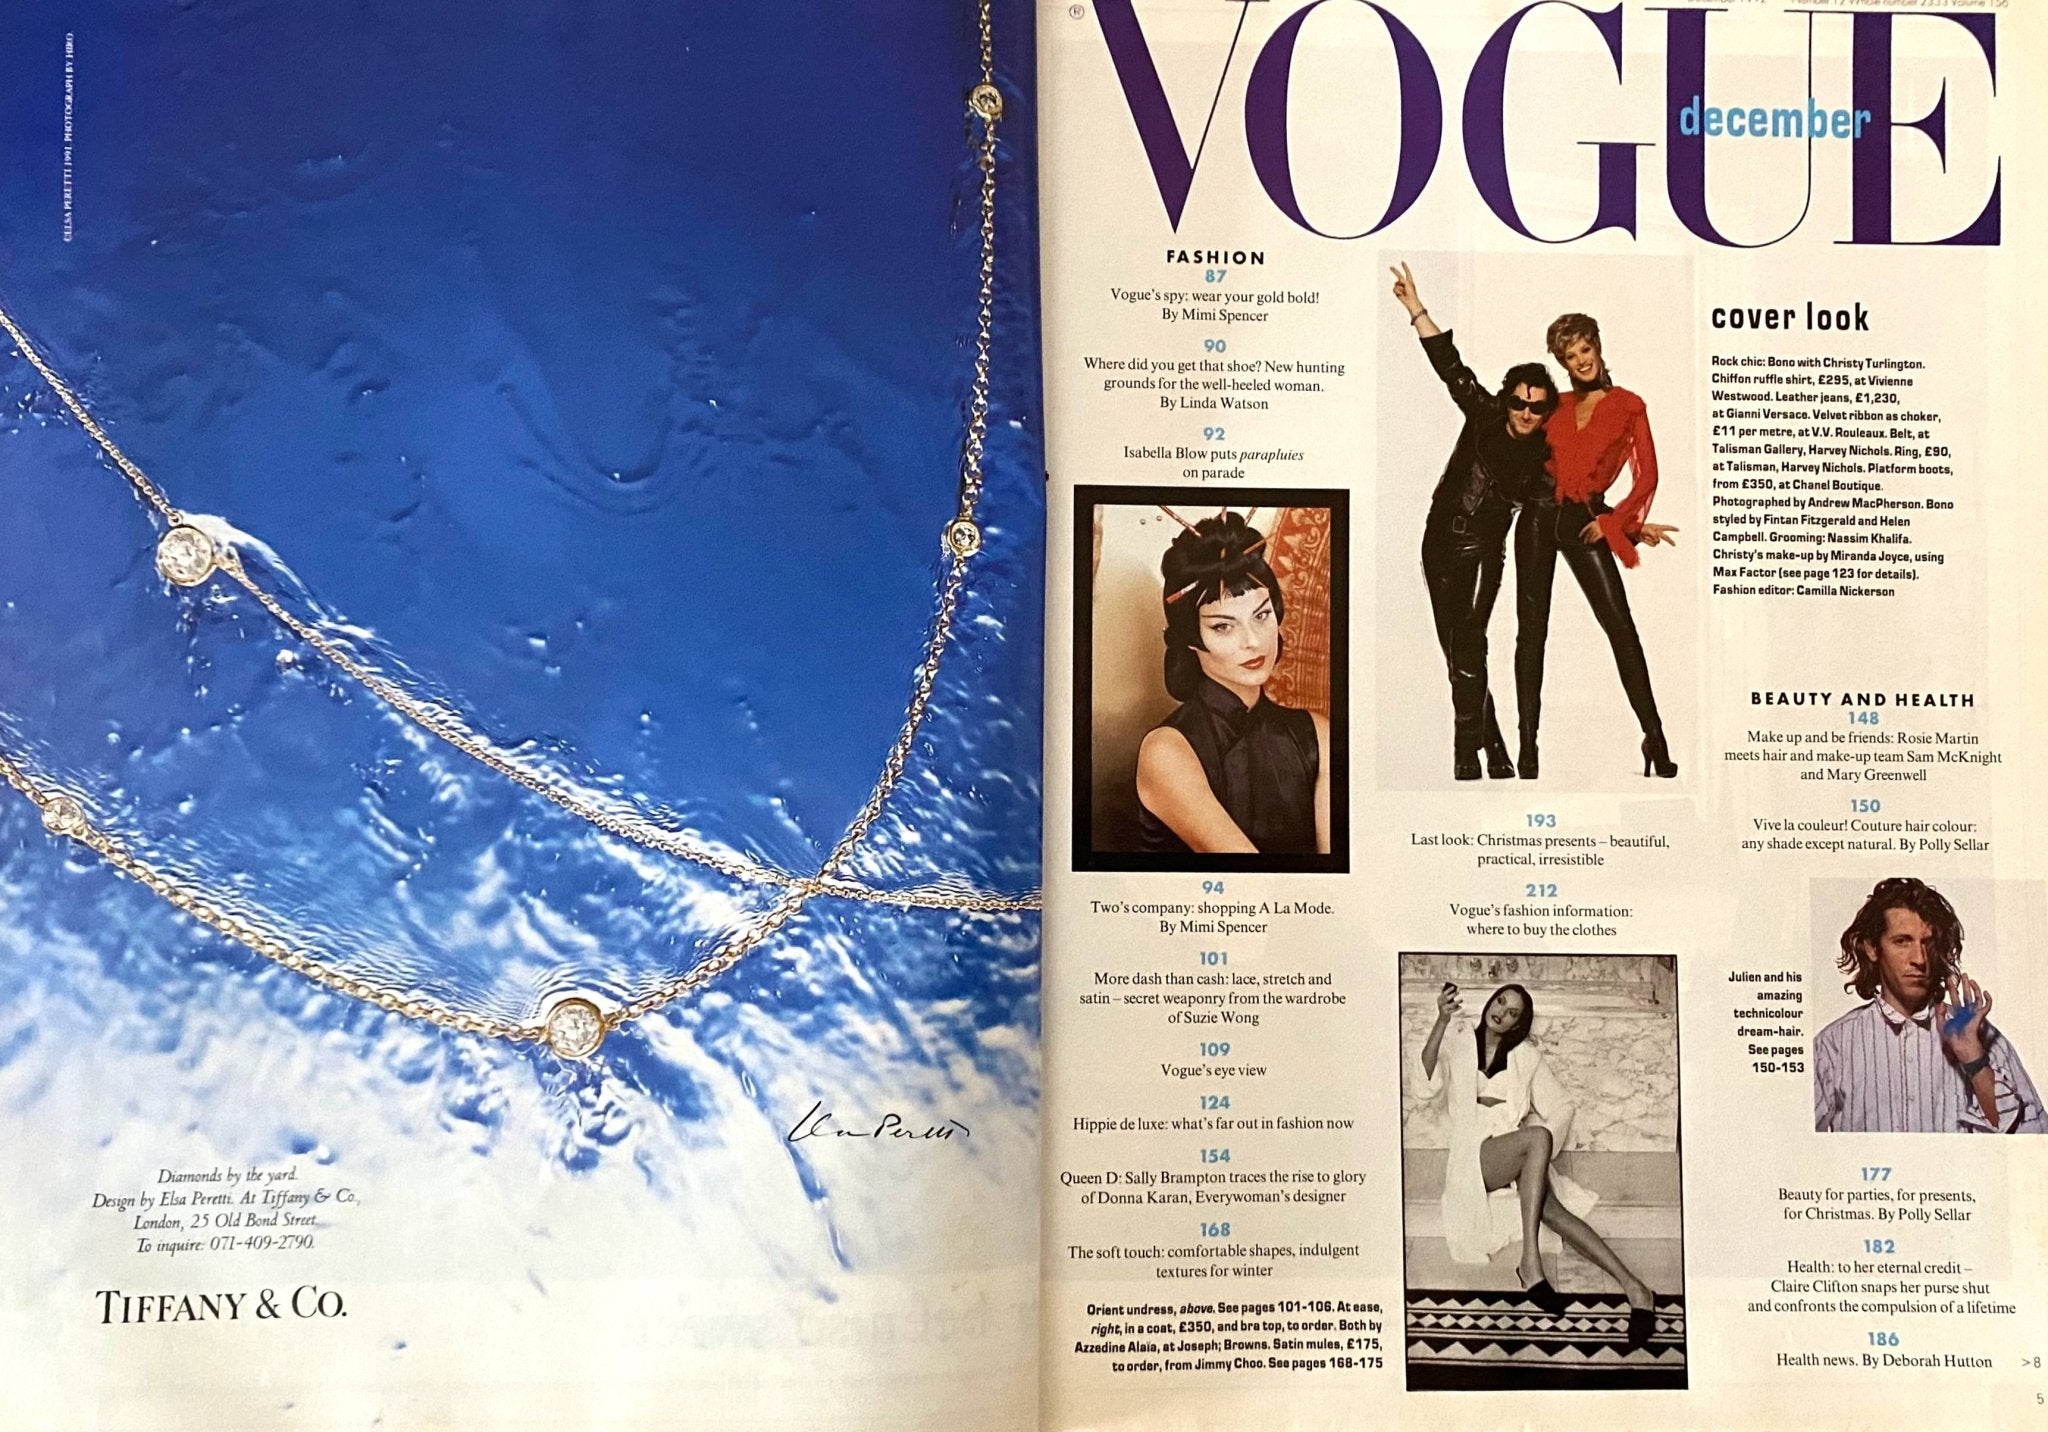 1992 VOGUE Magazine - “Rock Fame Fashion” - Cover by Andrew Macpherson - style - CHNGR